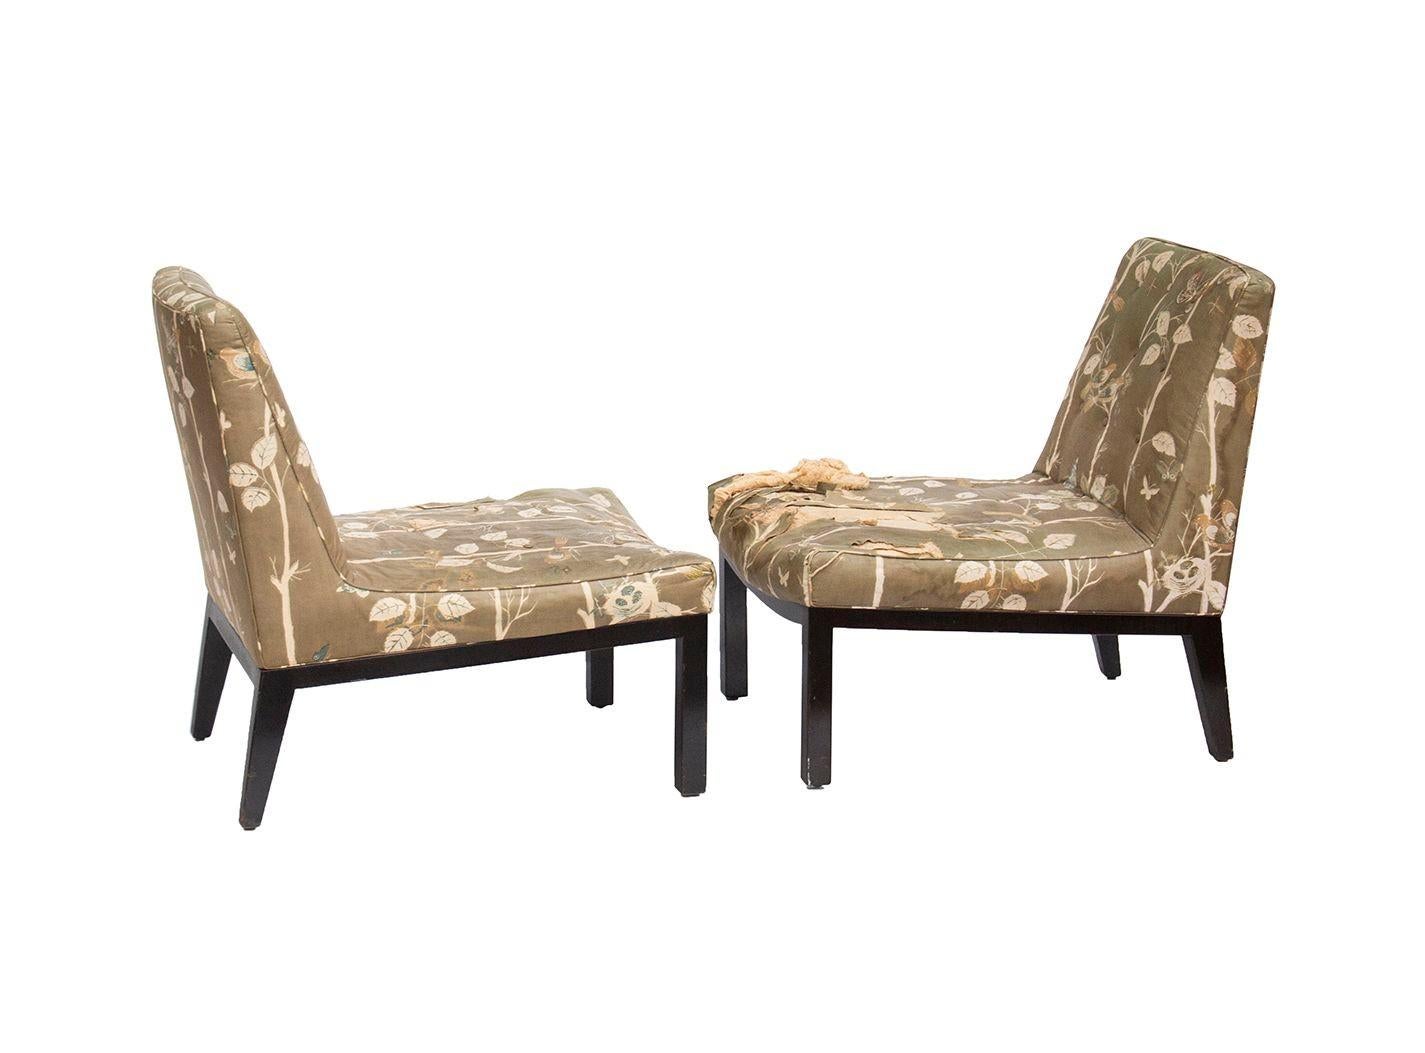 Tufted Slipper Chairs by Edward Wormley for Dunbar, pair For Sale 2